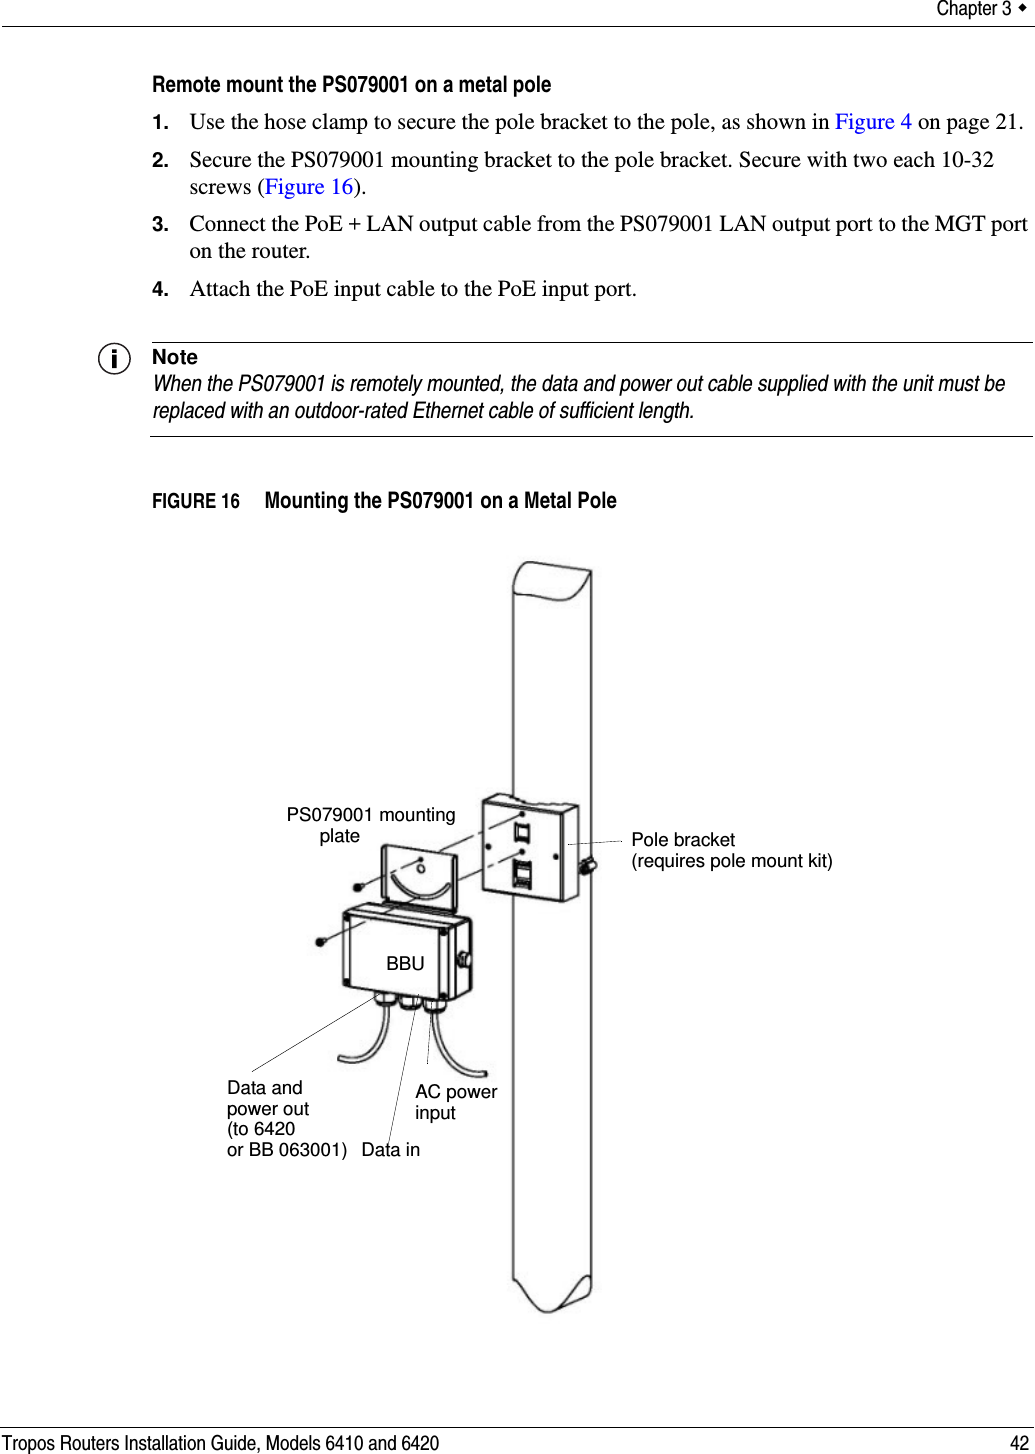 Chapter 3  Tropos Routers Installation Guide, Models 6410 and 6420 42Remote mount the PS079001 on a metal pole1. Use the hose clamp to secure the pole bracket to the pole, as shown in Figure 4 on page 21.2. Secure the PS079001 mounting bracket to the pole bracket. Secure with two each 10-32 screws (Figure 16).3. Connect the PoE + LAN output cable from the PS079001 LAN output port to the MGT port on the router.4. Attach the PoE input cable to the PoE input port.NoteWhen the PS079001 is remotely mounted, the data and power out cable supplied with the unit must be replaced with an outdoor-rated Ethernet cable of sufficient length.FIGURE 16   Mounting the PS079001 on a Metal PolePS079001 mountingplateBBUData and AC powerinput Data inpower out(to 6420or BB 063001)Pole bracket(requires pole mount kit)